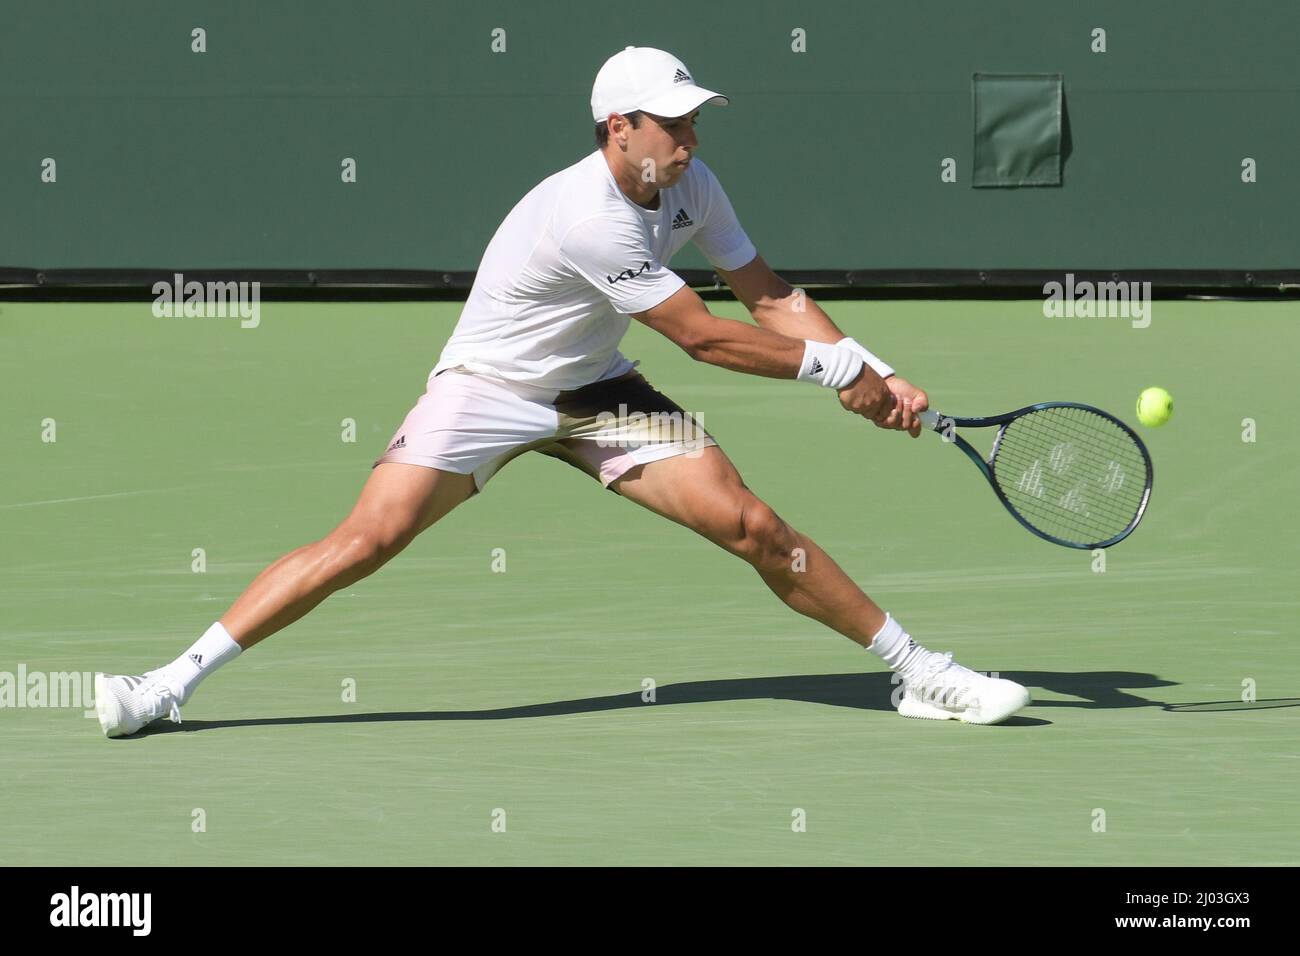 Indian Wells, California on March 15, 2022: Jaume Munar (ESP) is defeated by Taylor Fritz (USA) 4-6, 6-2, 6-7 (2-7), at the BNP Paribas Open being played at Indian Wells Tennis Garden in Indian Wells, California on March 15, 2022: © Karla Kinne/Tennisclix/CSM Credit: Cal Sport Media/Alamy Live News Stock Photo